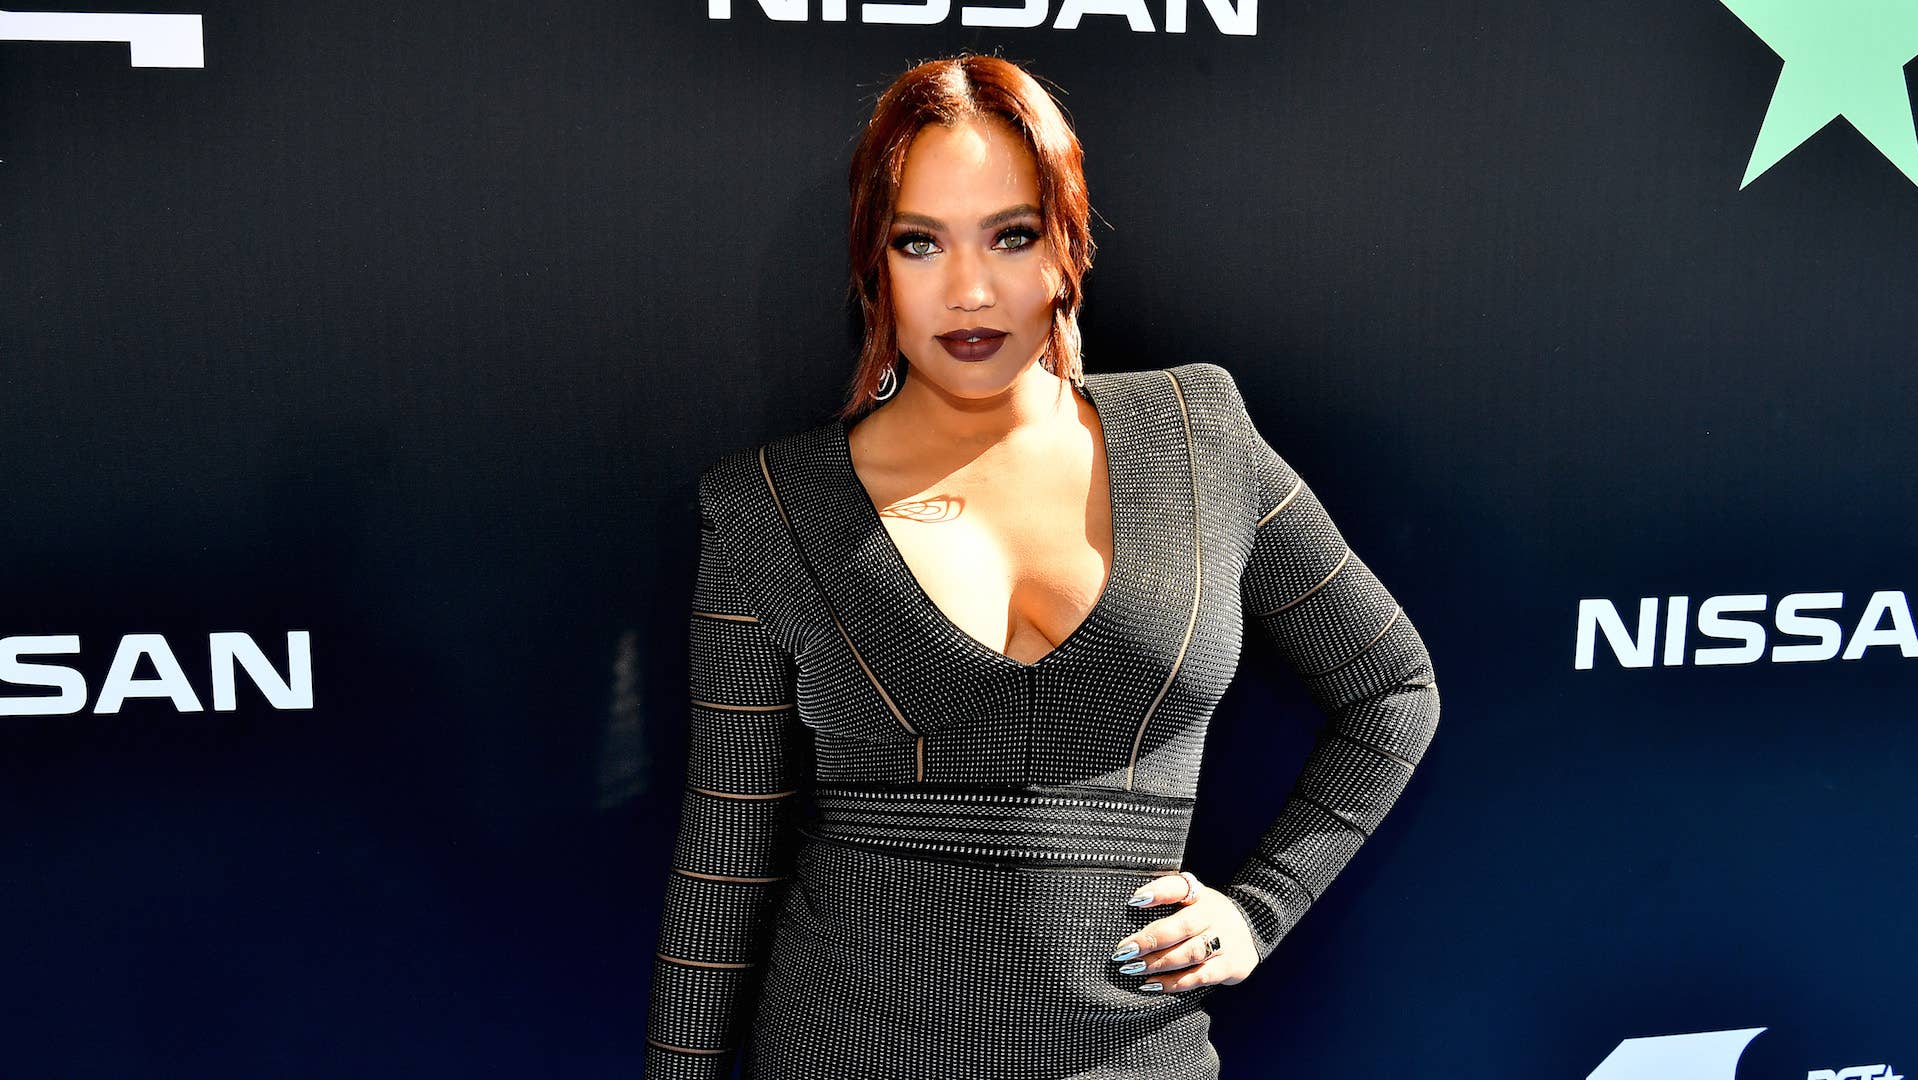 Ayesha Curry attends the 2019 BET Awards at Microsoft Theater